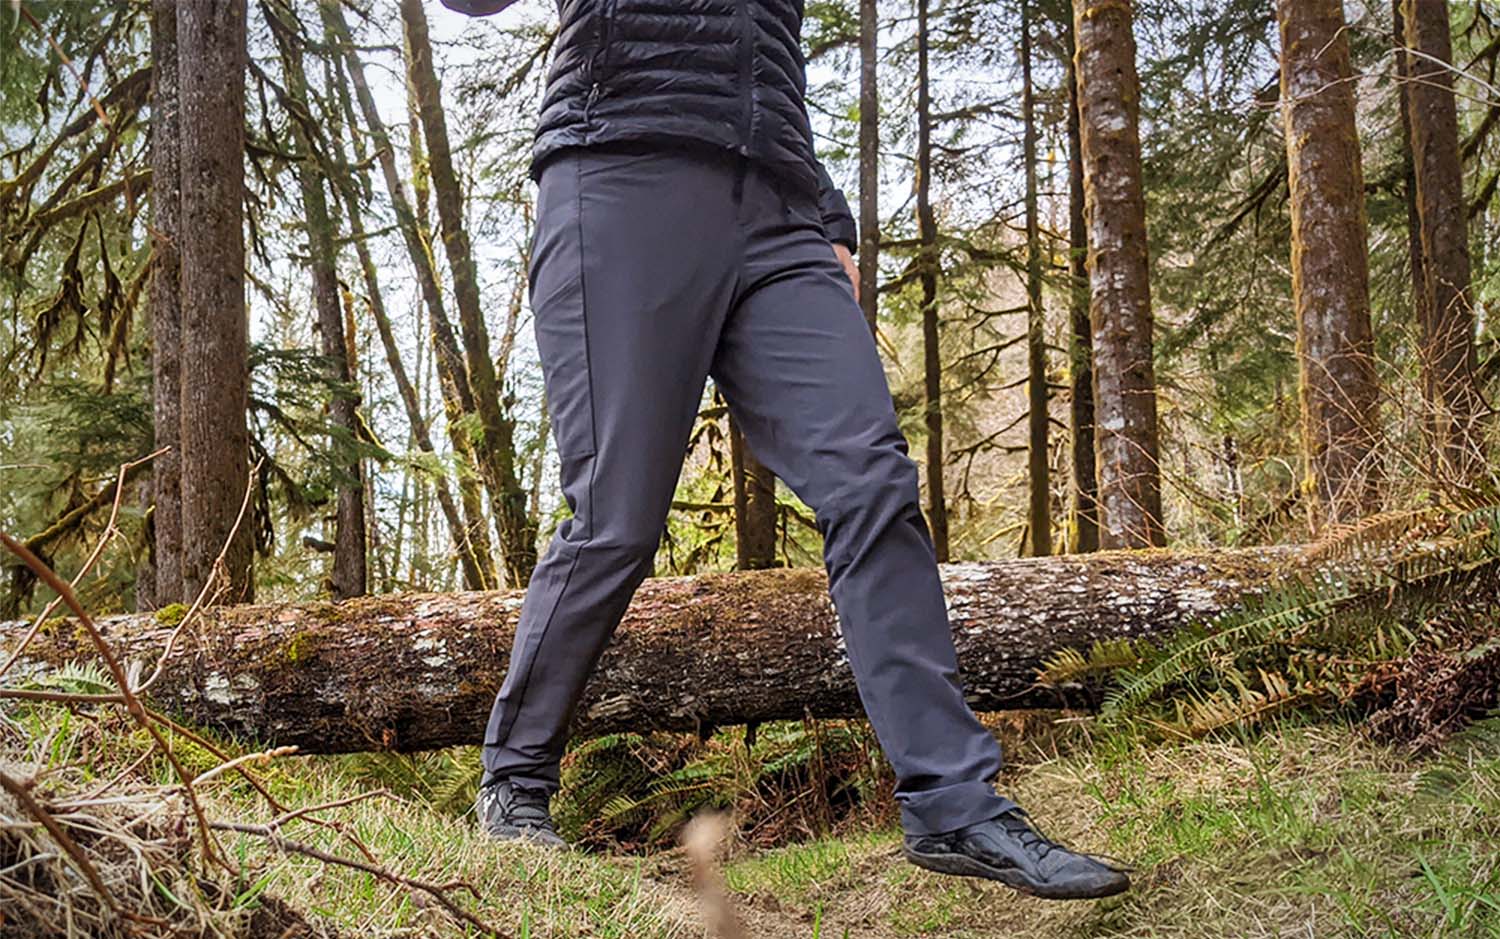 Best Hiking Pants of 2022  Experts Review (A Full Guide)